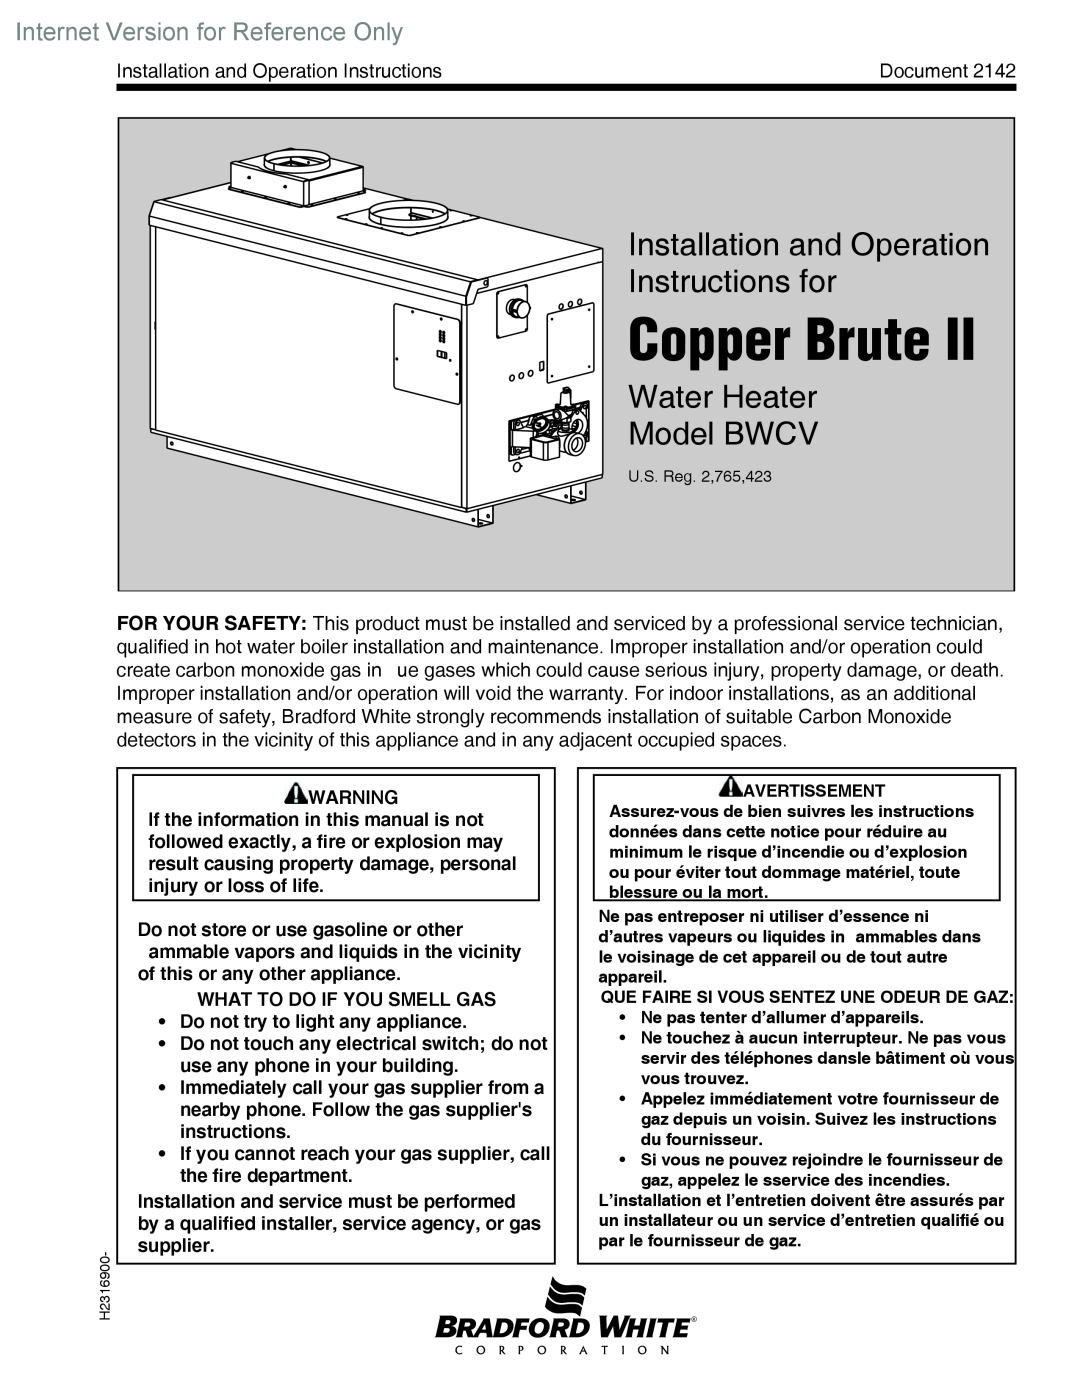 Bradford-White Corp warranty Internet Version for Reference Only, Copper Brute, Water Heater Model BWCV, Bradford White 